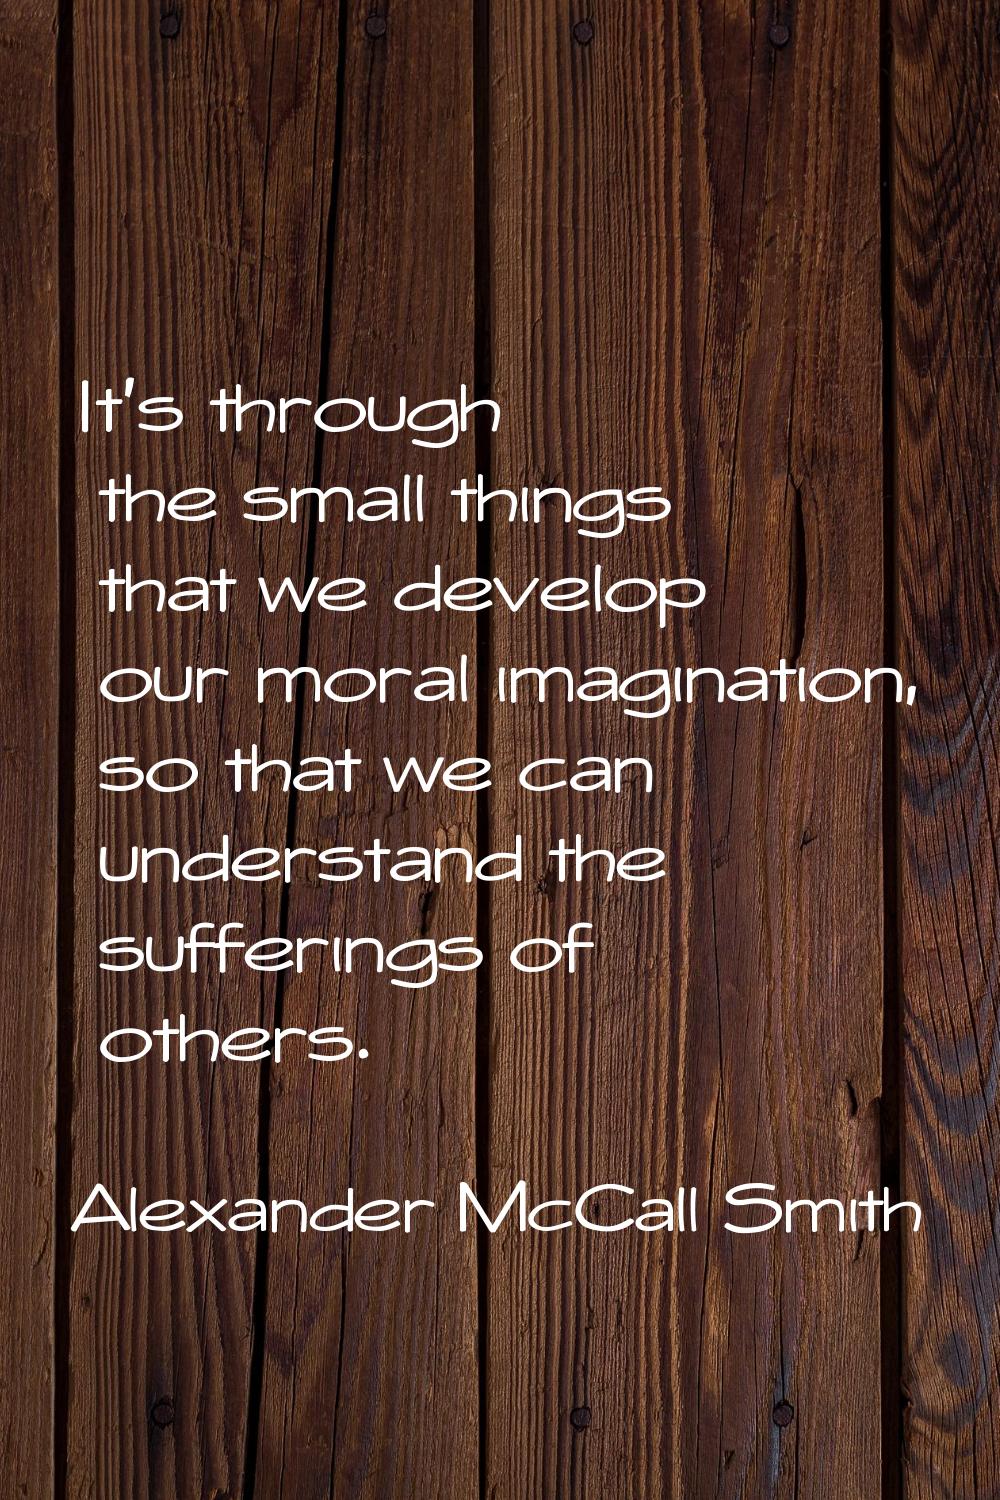 It's through the small things that we develop our moral imagination, so that we can understand the 